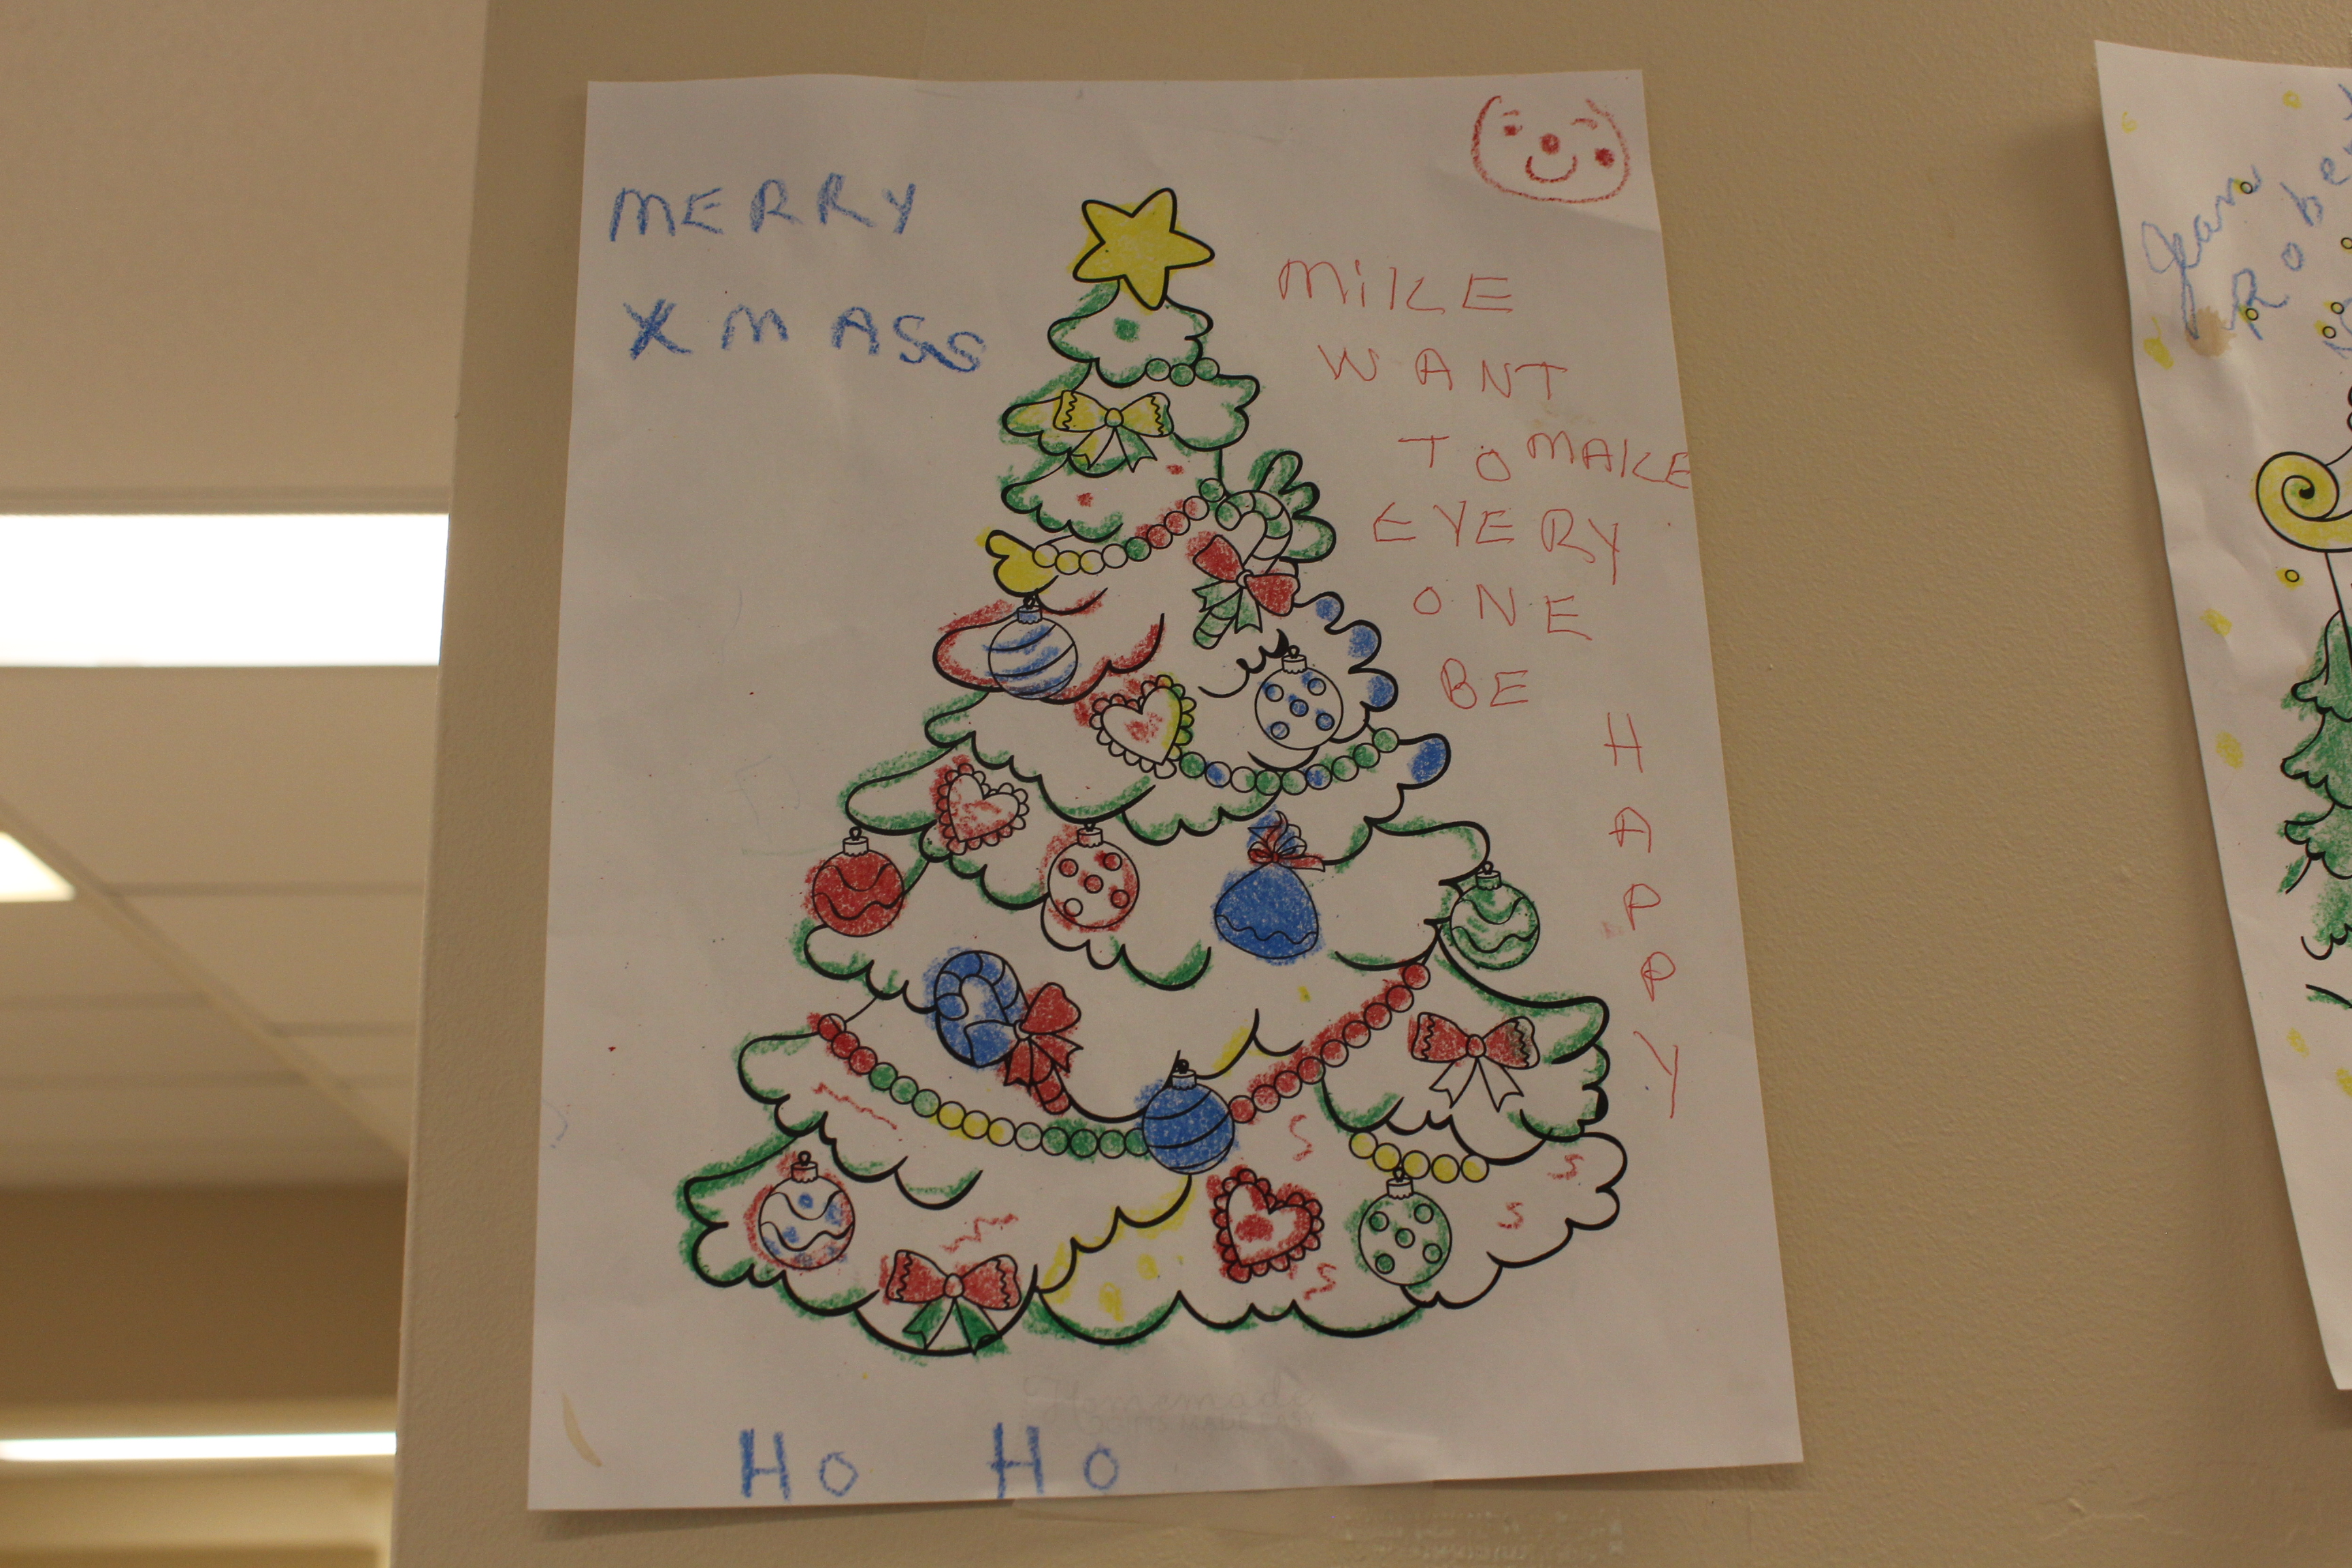 A colouring picture of a Christmas tree. It reads, "Merry X-Mas. Mike want to make everyone be happy. Ho Ho."